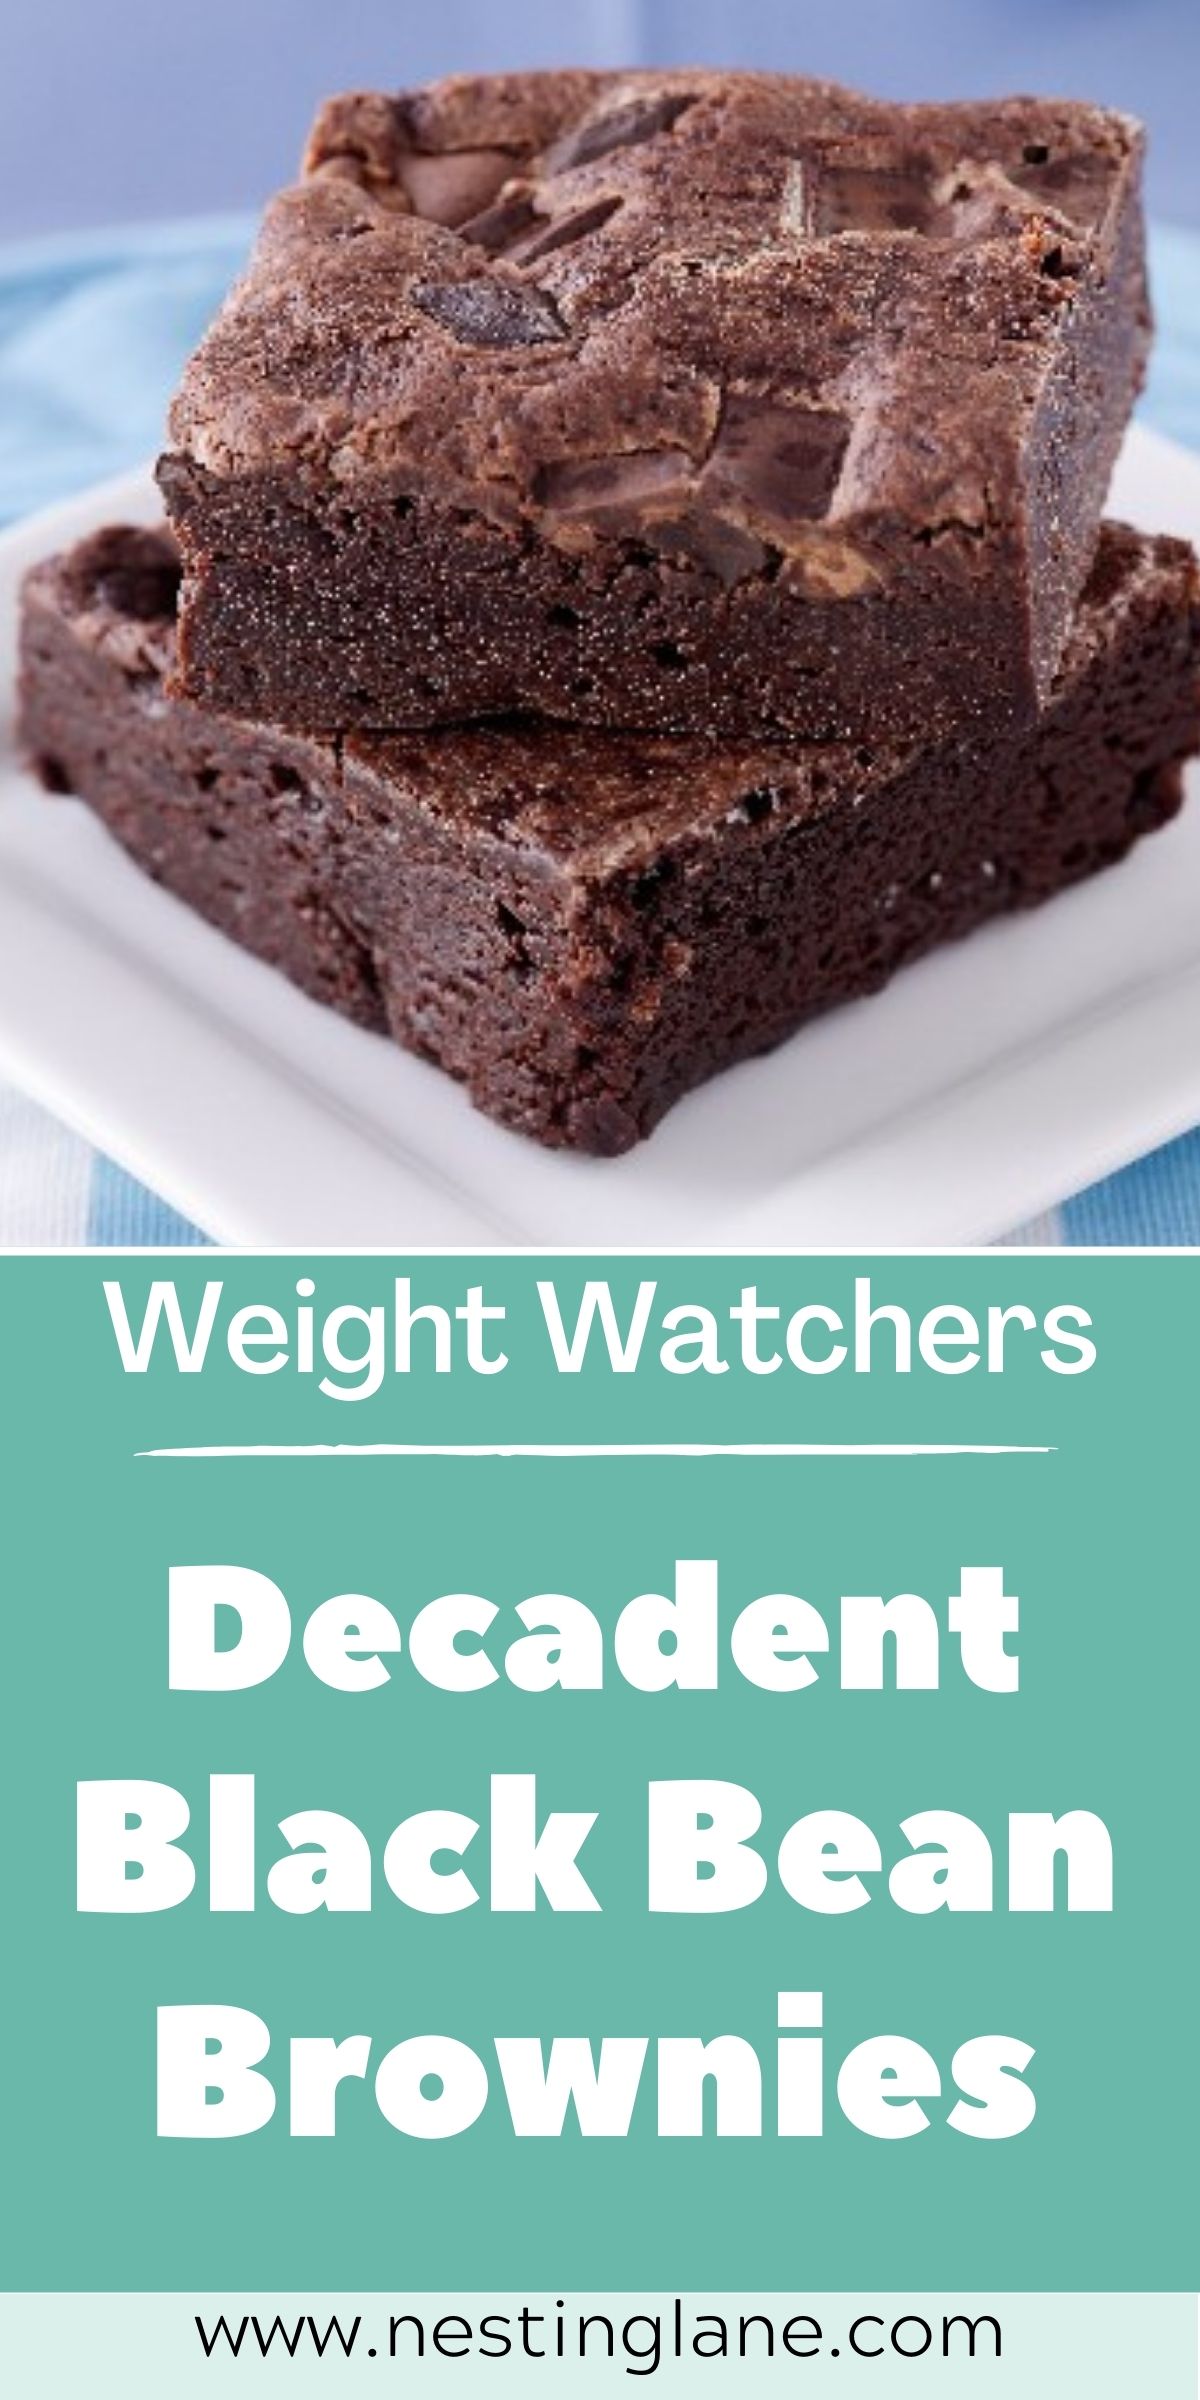 Graphic for Pinterest of Weight Watchers Black Bean Brownies Recipe.